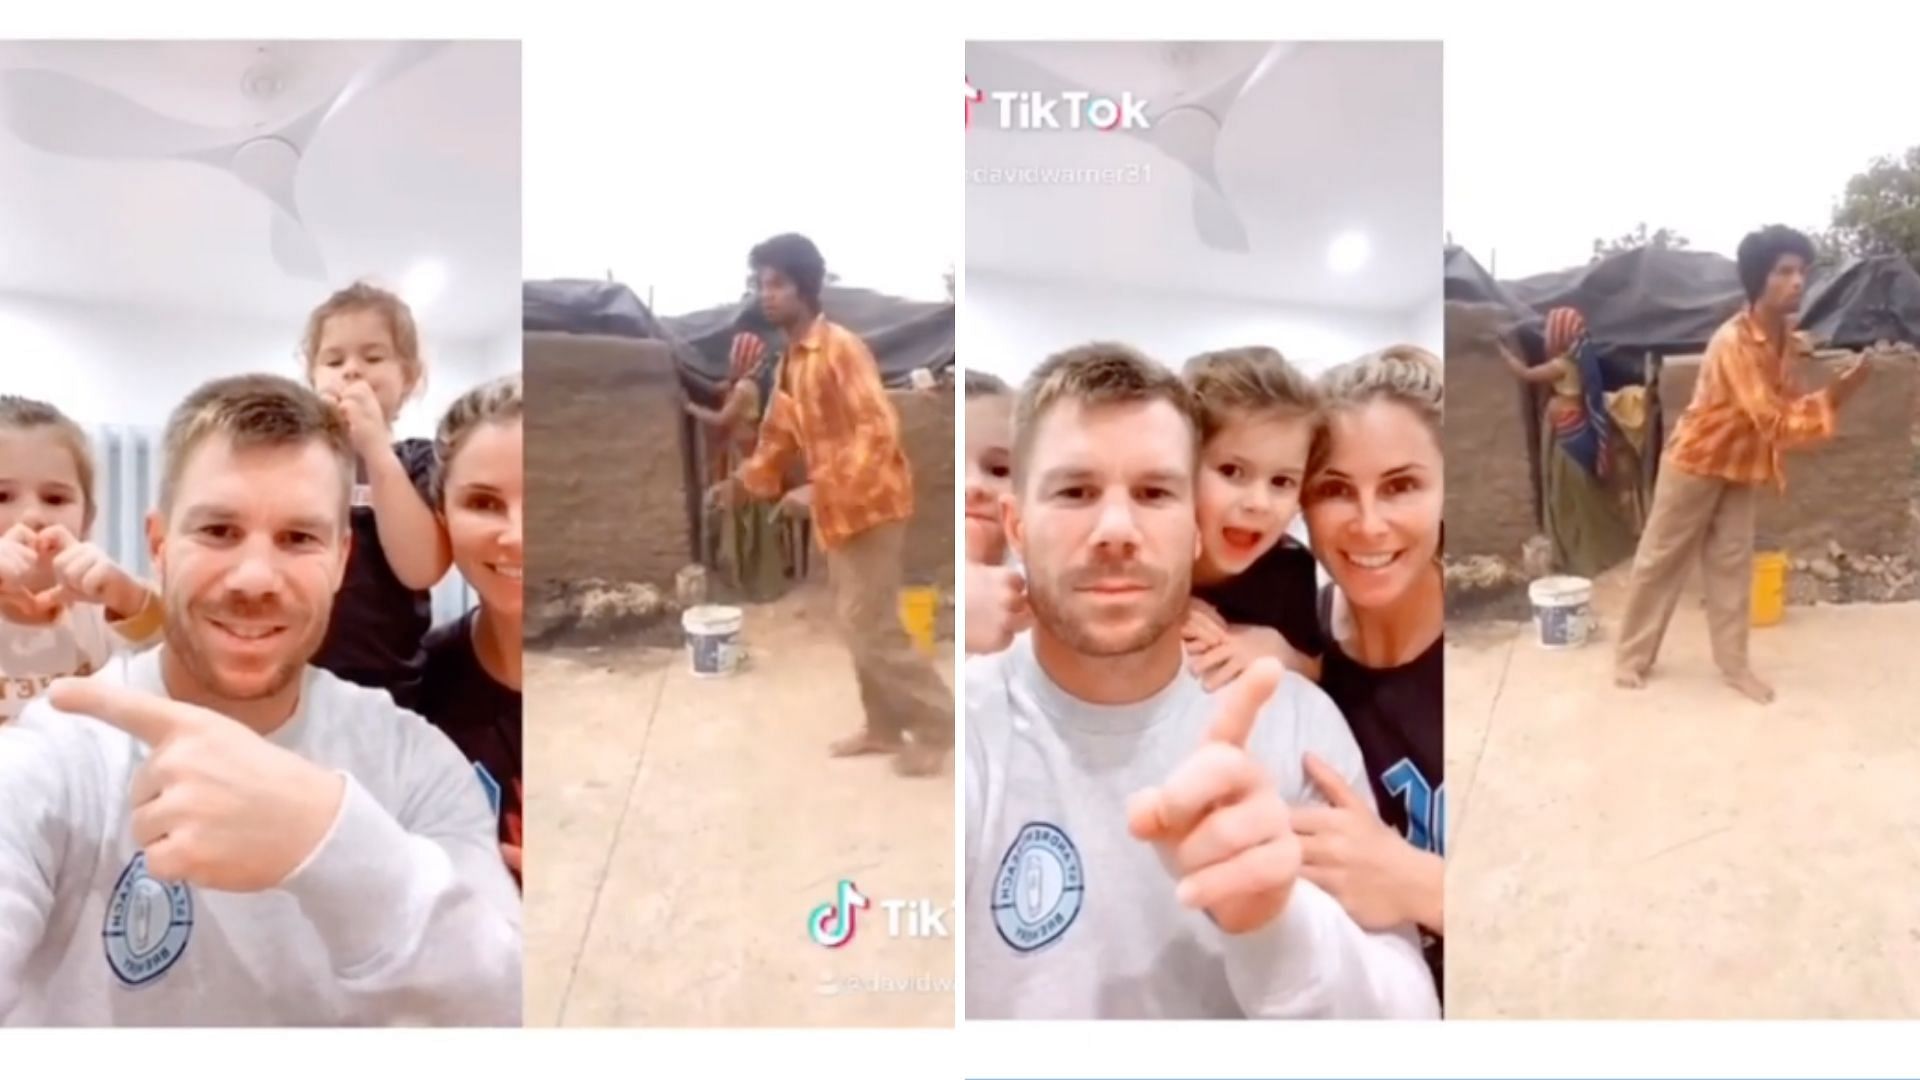 David Warner posted a video with him and his family appreciating a dance performance by an Indian man.